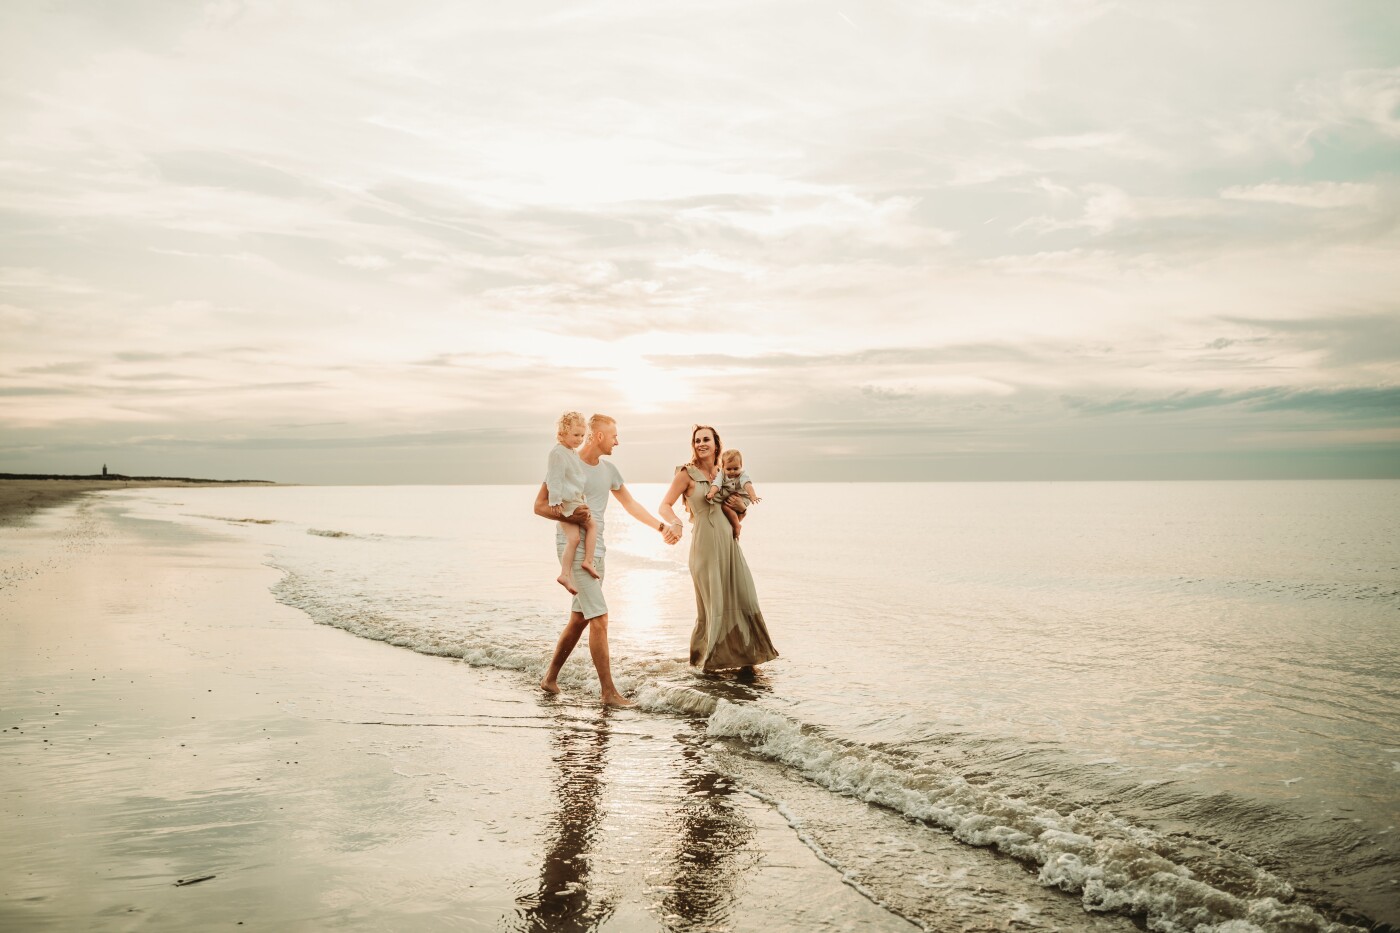 Family photo shoot on the most beautiful beach in the Netherlands, made on the island of Goeree Over...